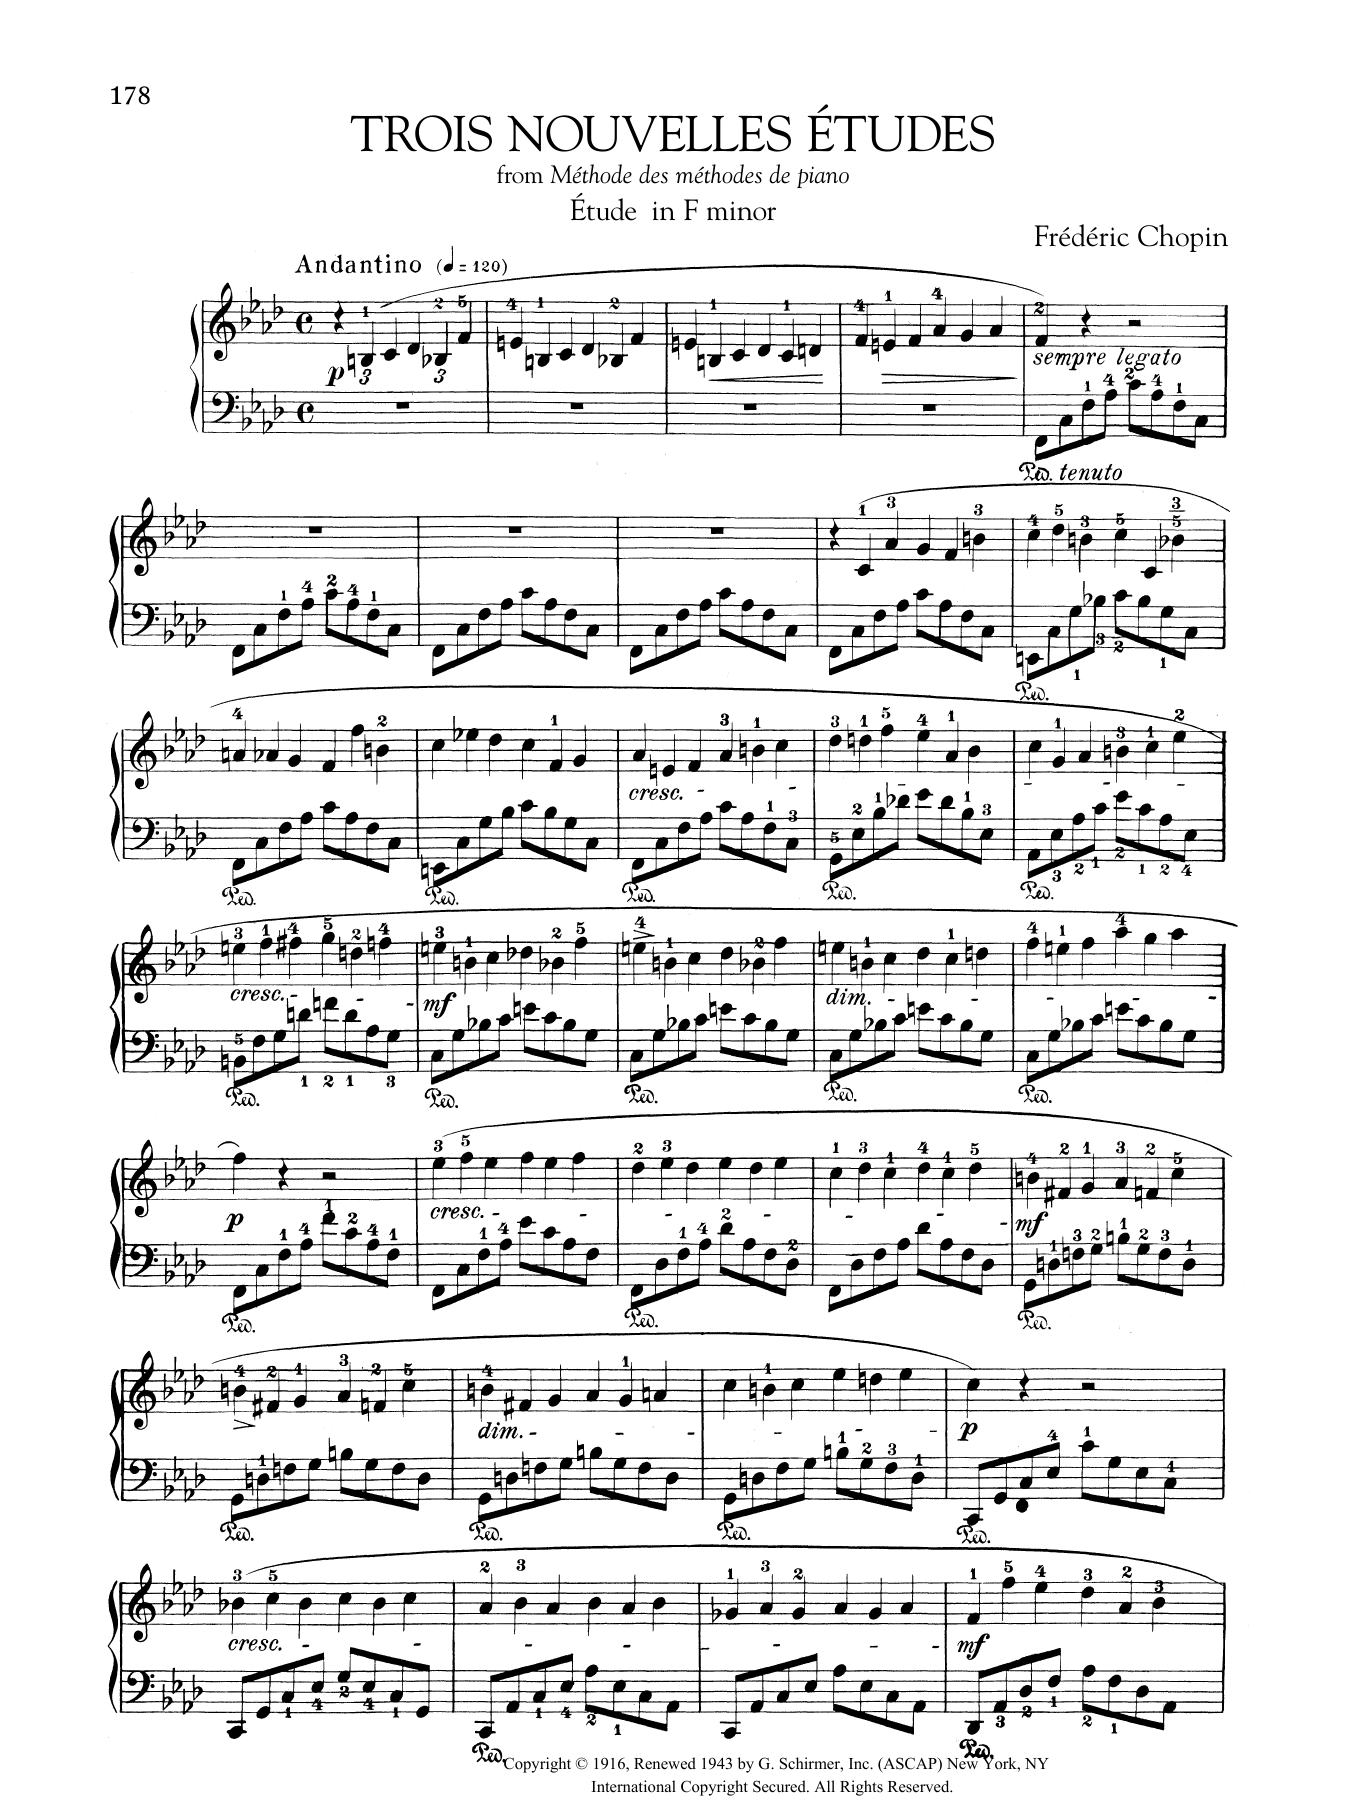 Frédéric Chopin Etude in F minor, from Trois Nouvelles Etudes from Methode des methodes de piano sheet music notes and chords. Download Printable PDF.